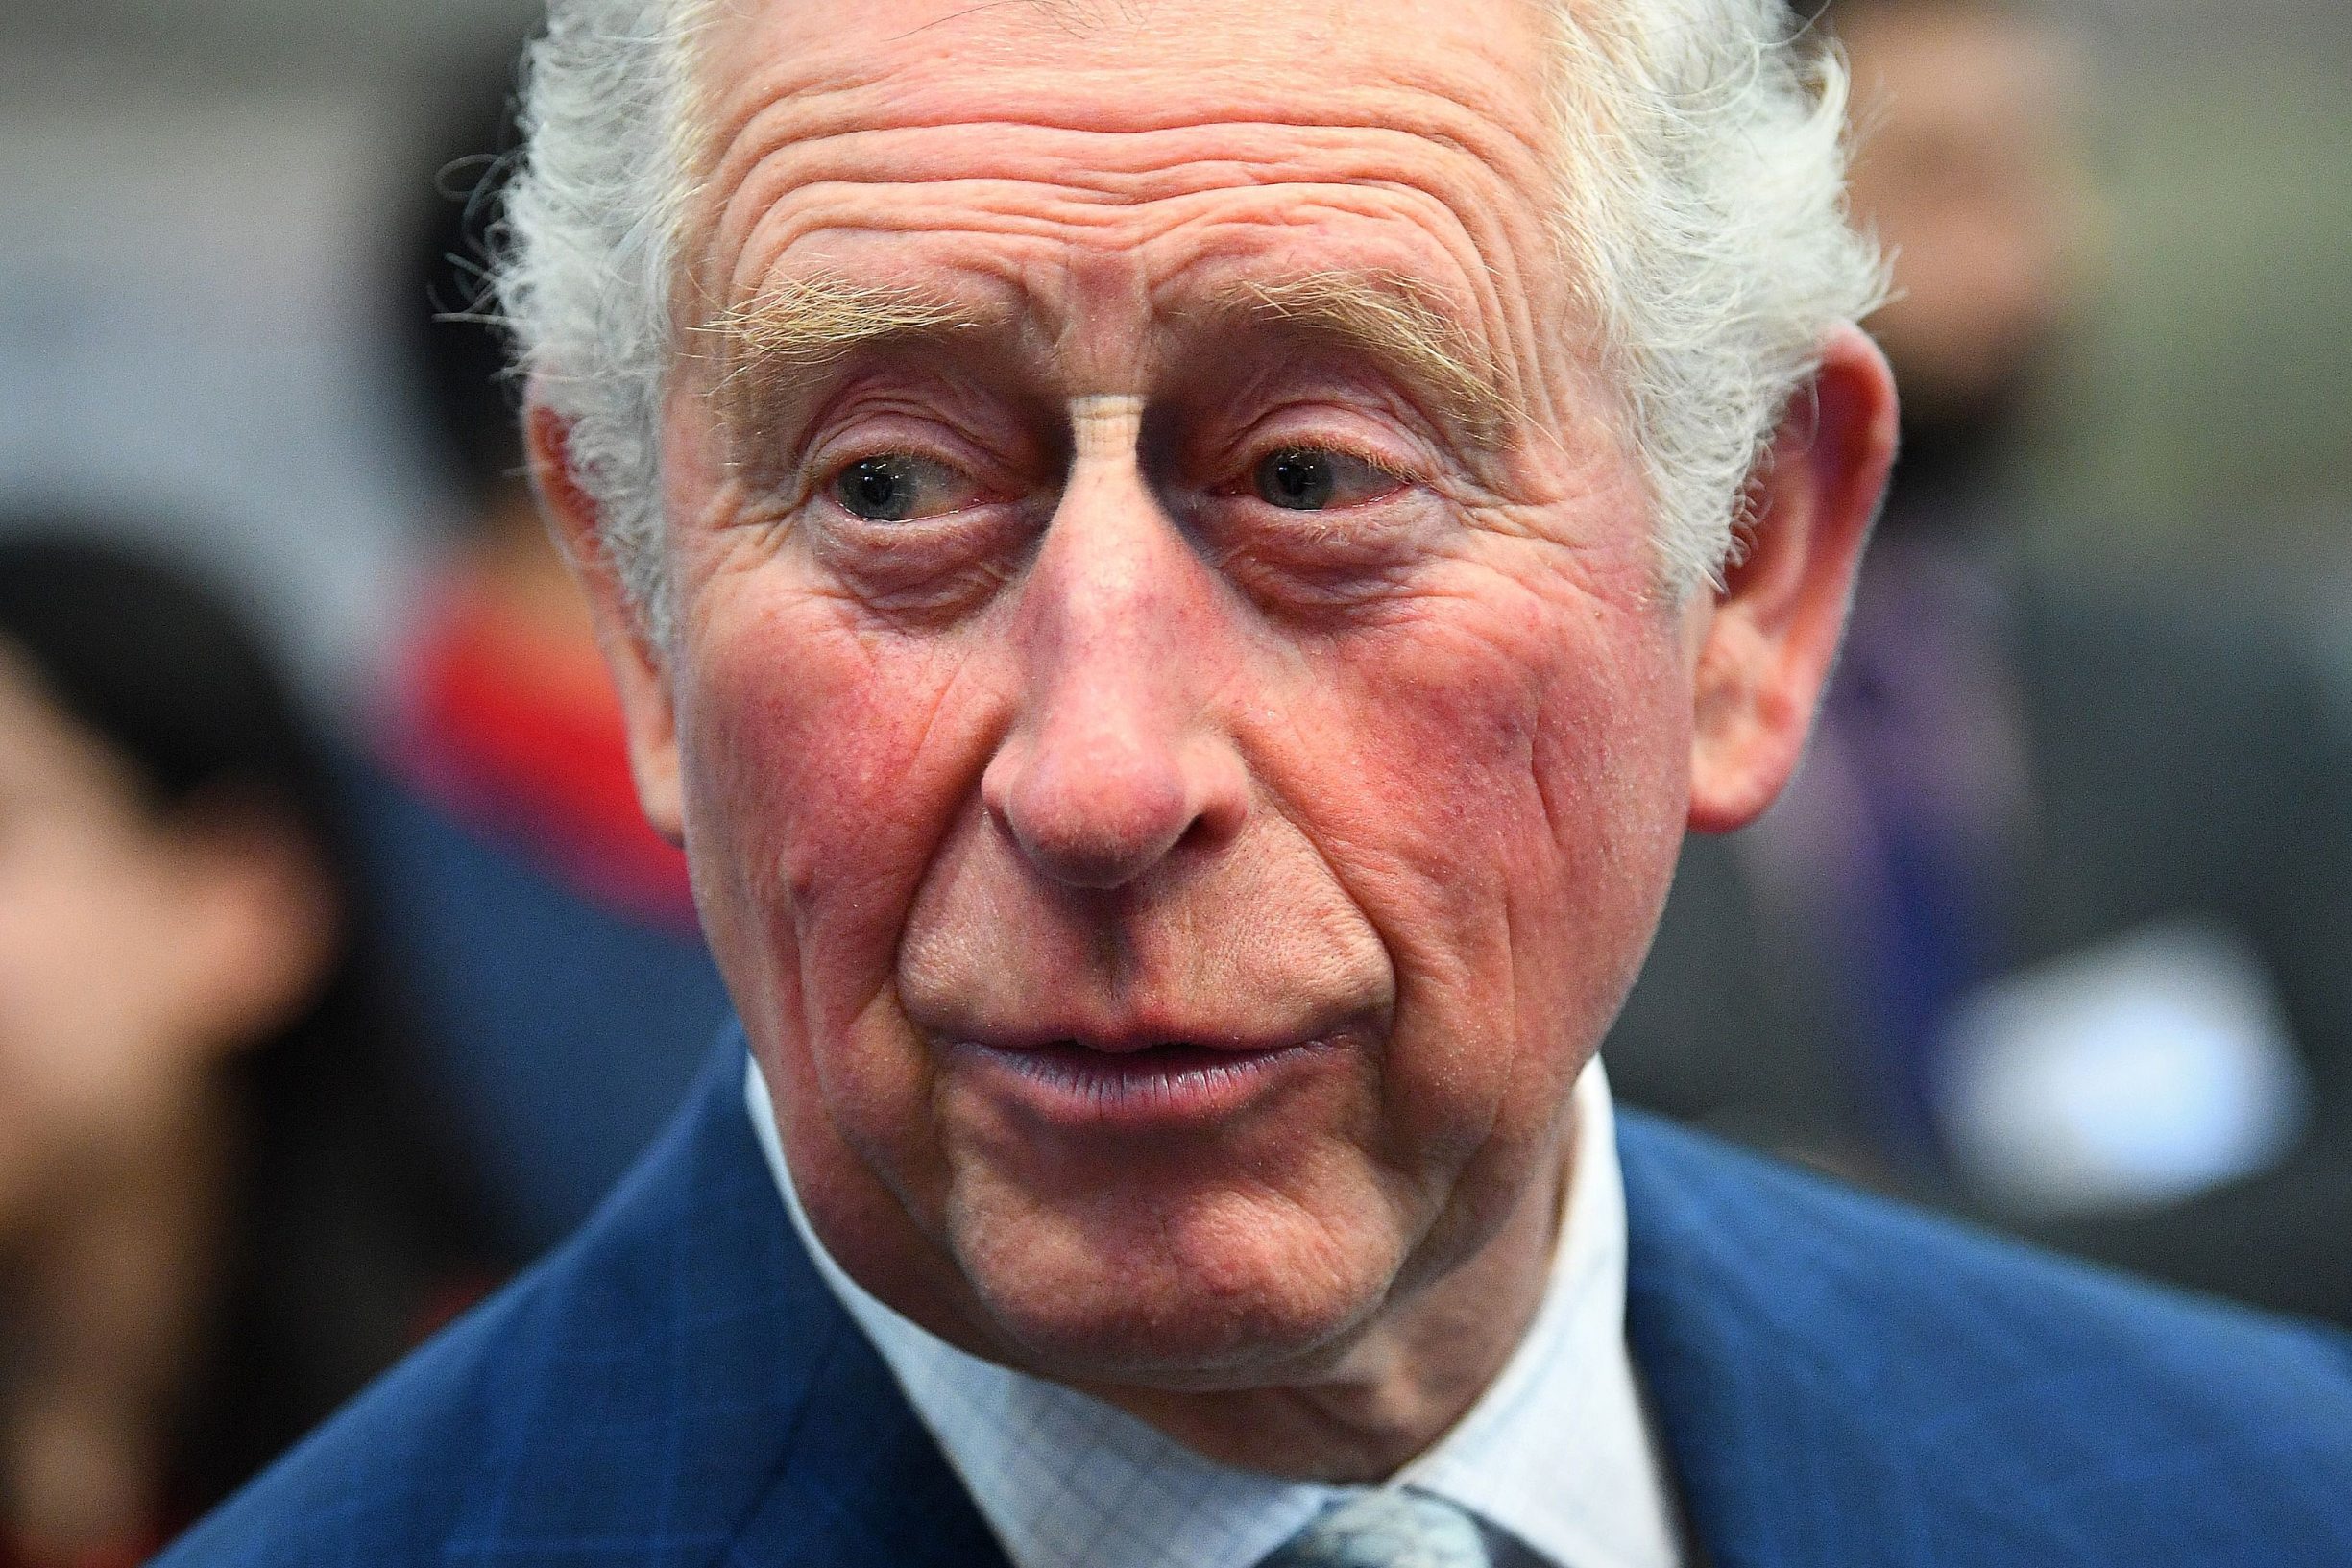 (FILES) In this file photo taken on March 04, 2020 Britain's Prince Charles, Prince of Wales reacts during his visit to the London Transport Museum in London on March 4, 2020, to take part in celebrations to mark 20 years of the museum. - Prince Charles, the eldest son and heir to Queen Elizabeth II, has tested positive for the new coronavirus, his office said on March 25, 2020. The 71-year-old is displaying mild symptoms of COVID-19 